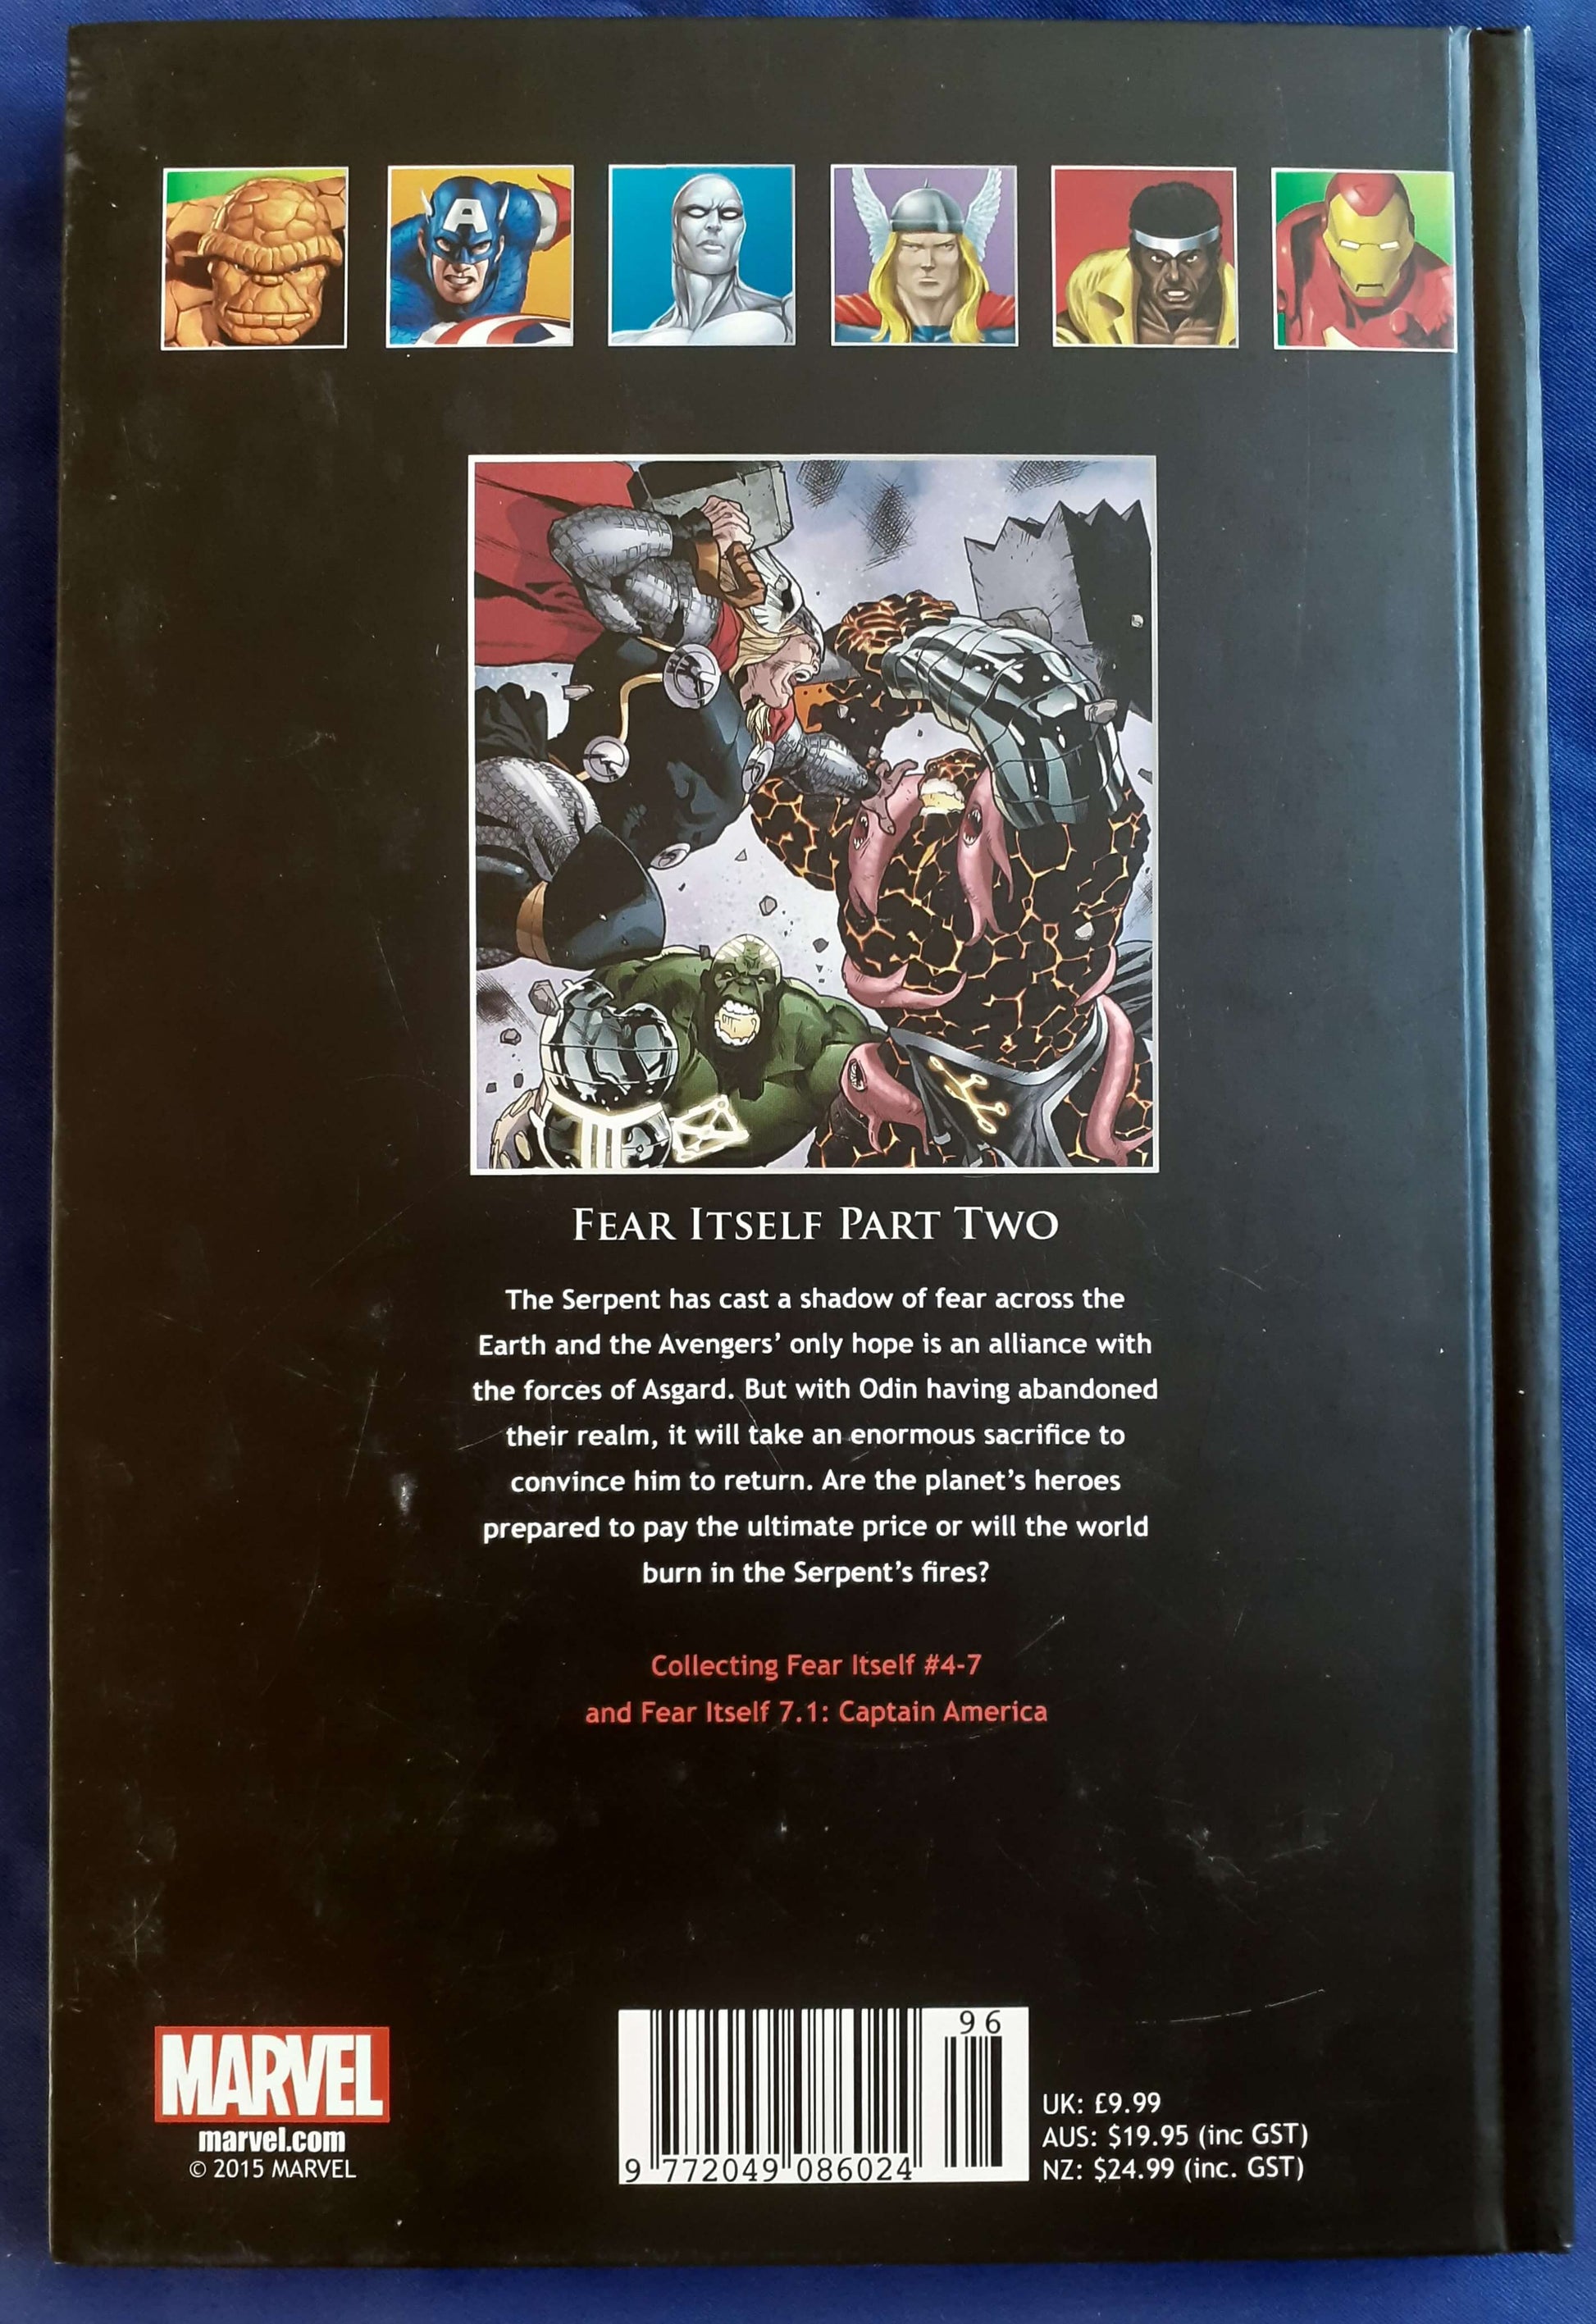 avengers, graphic novel, marvel graphic novels, marvel ultimate graphic collection - Best Books